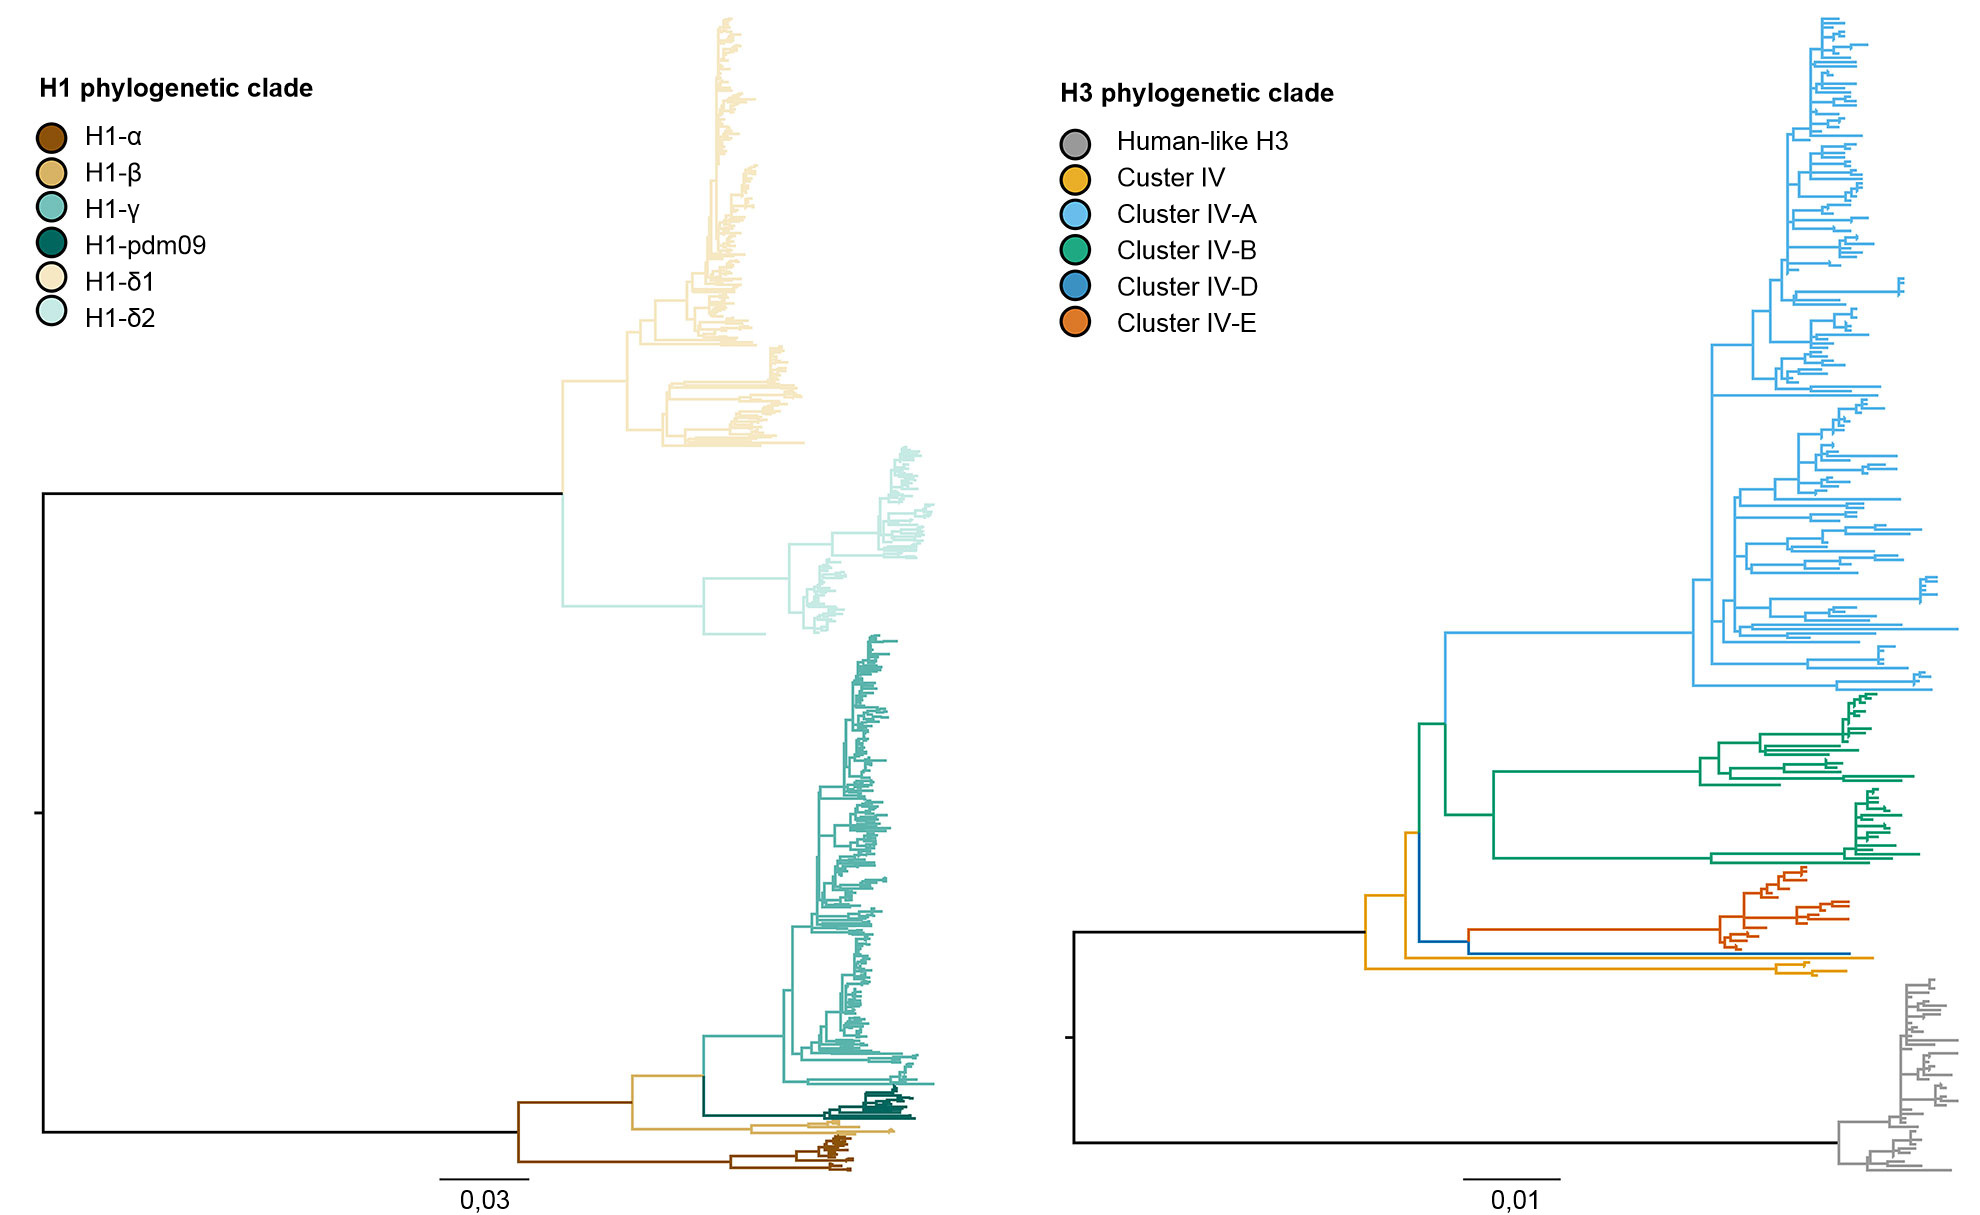 Phylogenies describing the genetic relationships of swine H1 and H3 influenza A hemagglutinin gene sequences from 2015 generated using maximum likelihood methods. Branch color represents clade designations. All branch lengths are drawn to scale, and the scale bar indicates the number of nucleotide substitutions per site.